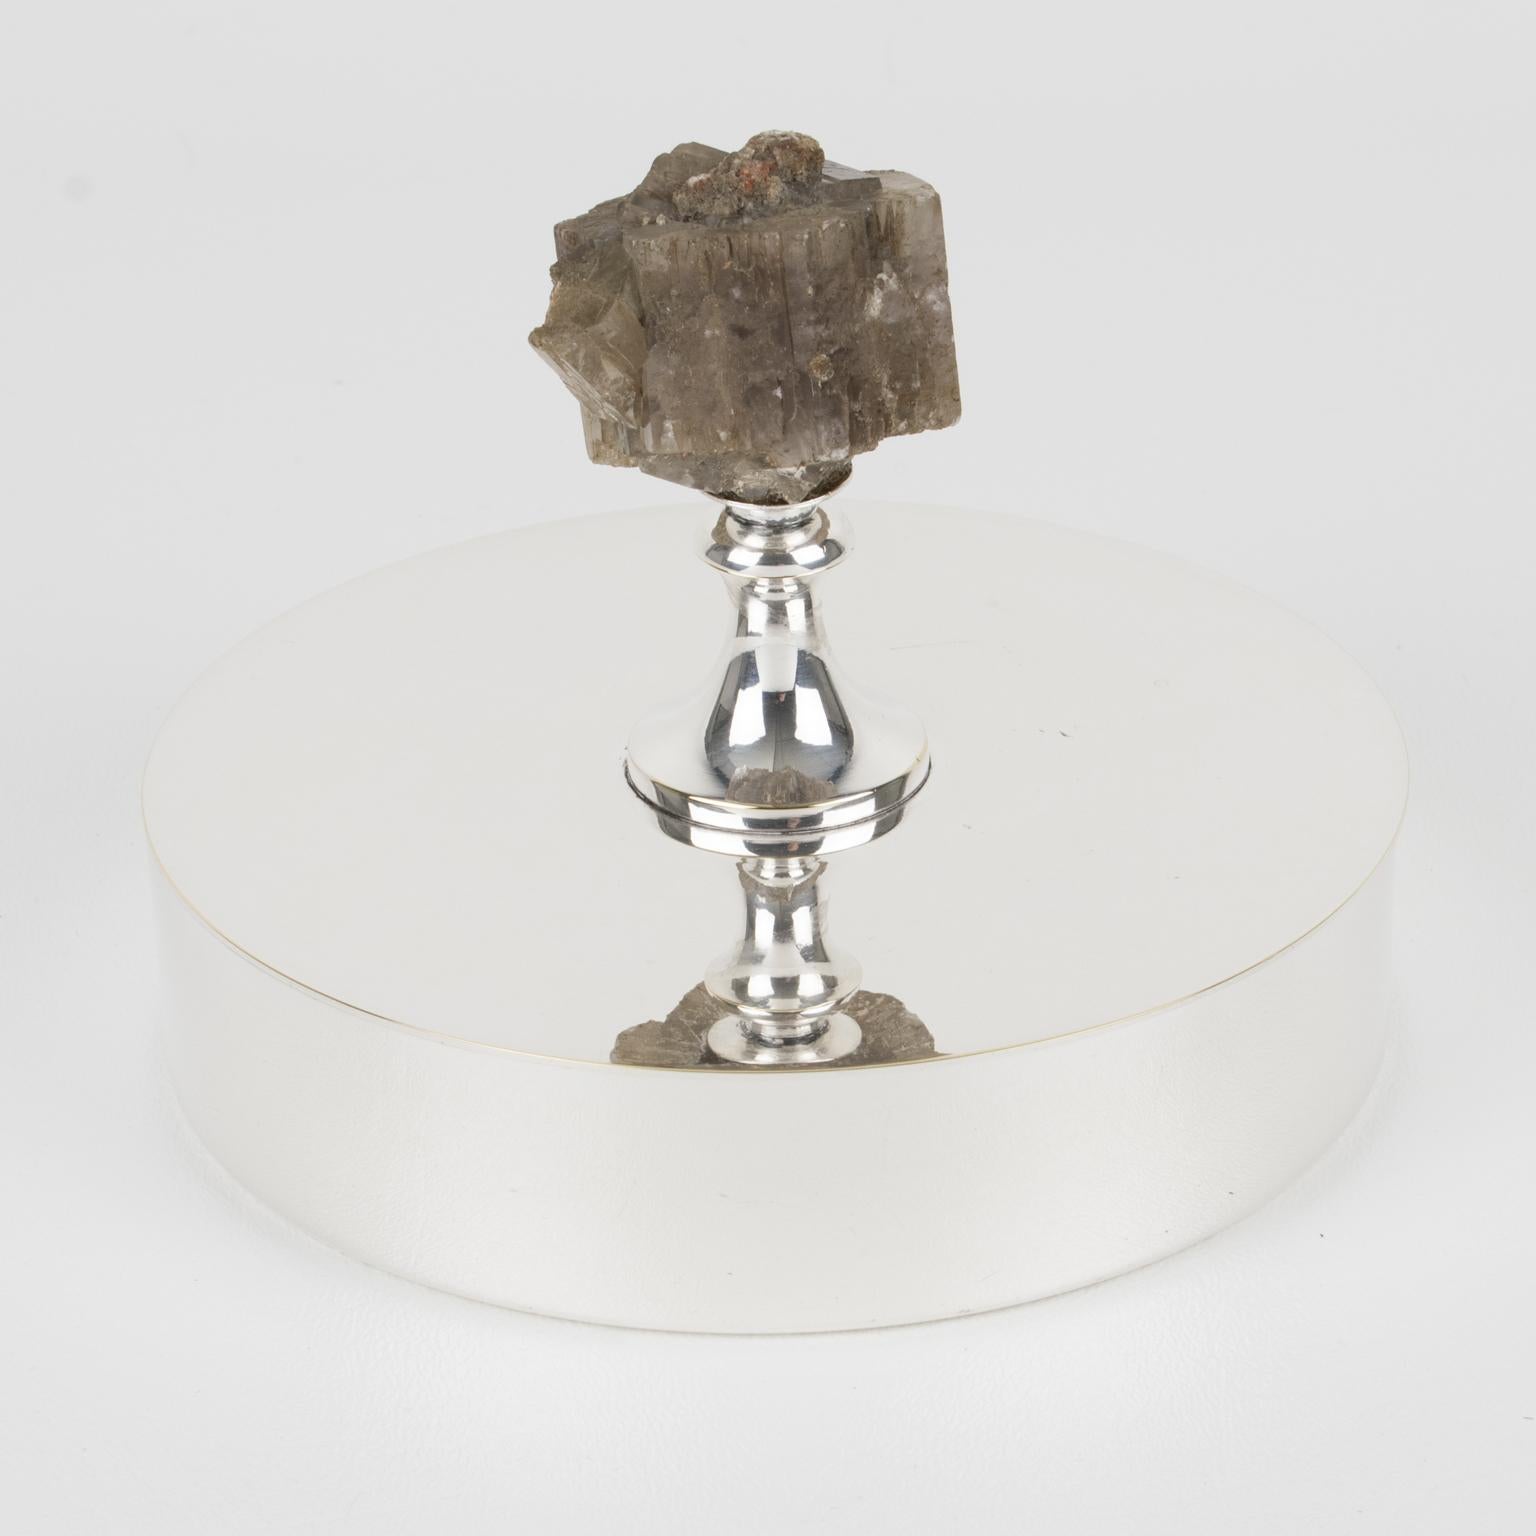 This beautiful modernist silver plate decorative box was crafted for the renowned Christian Dior House for his Home Collection. It features an elegant minimalist round shape with a lid ornate with a large quartz stone as the finial. The natural form